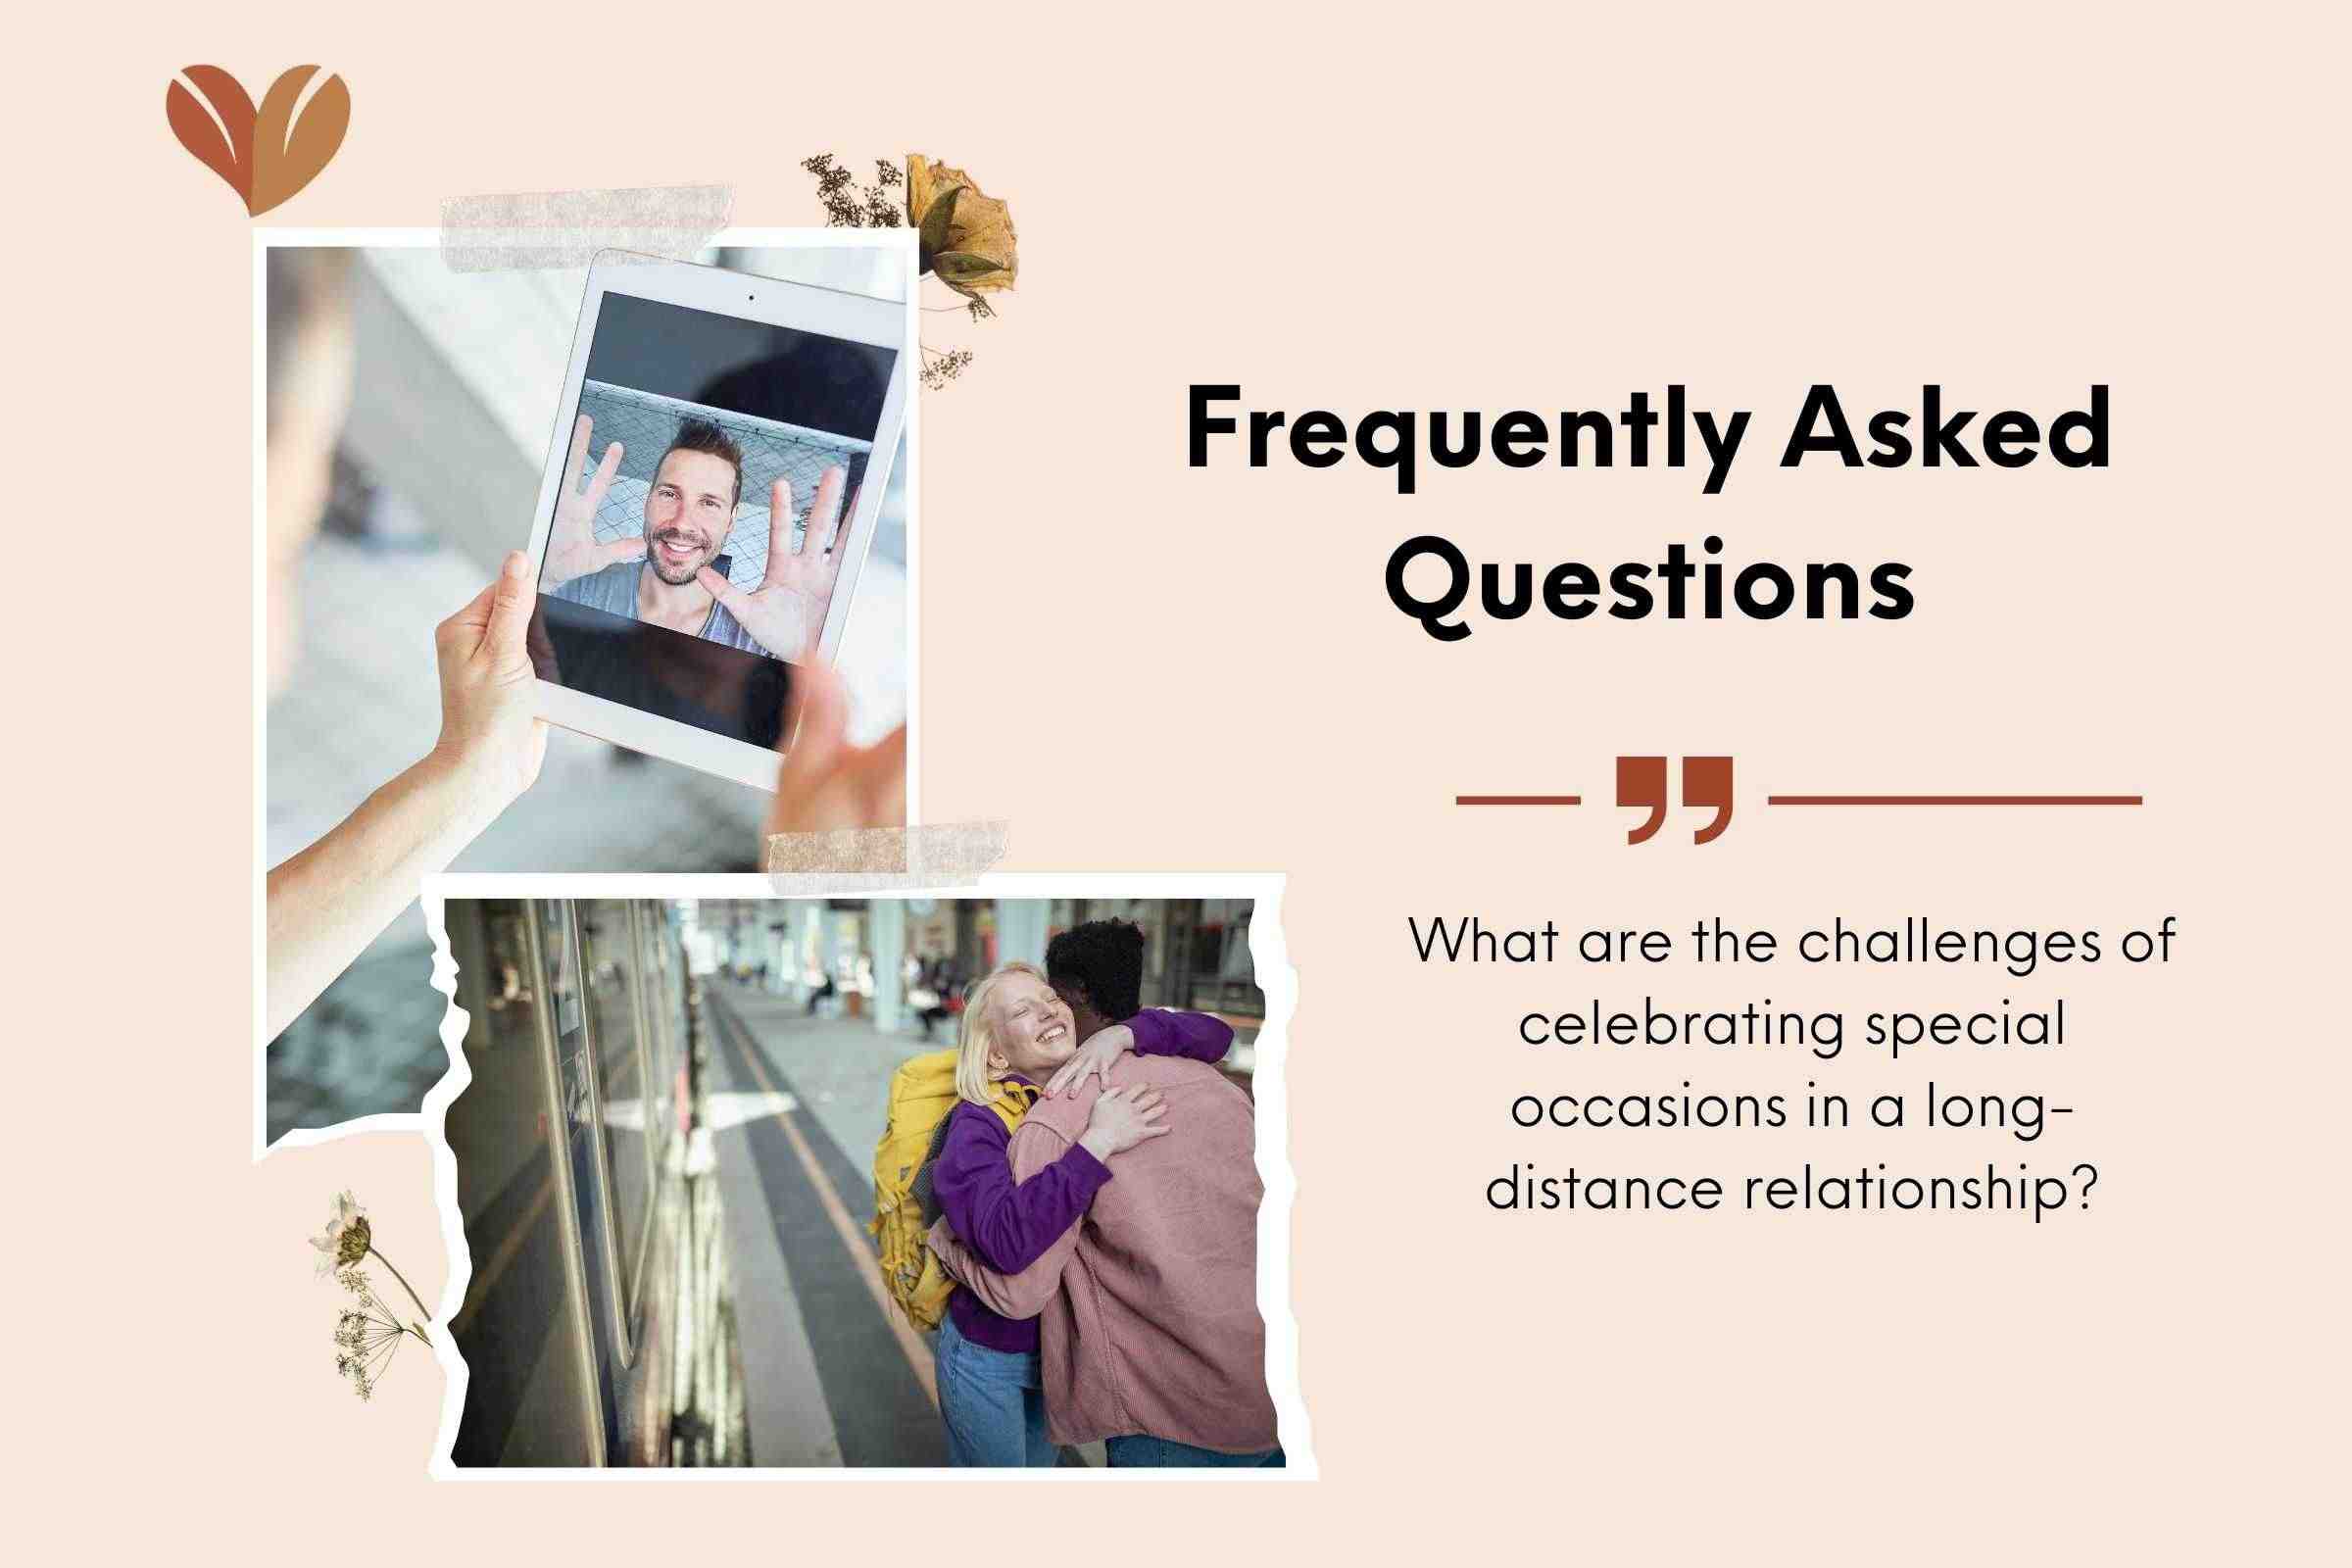 What are the challenges of celebrating special occasions in a long-distance relationship?